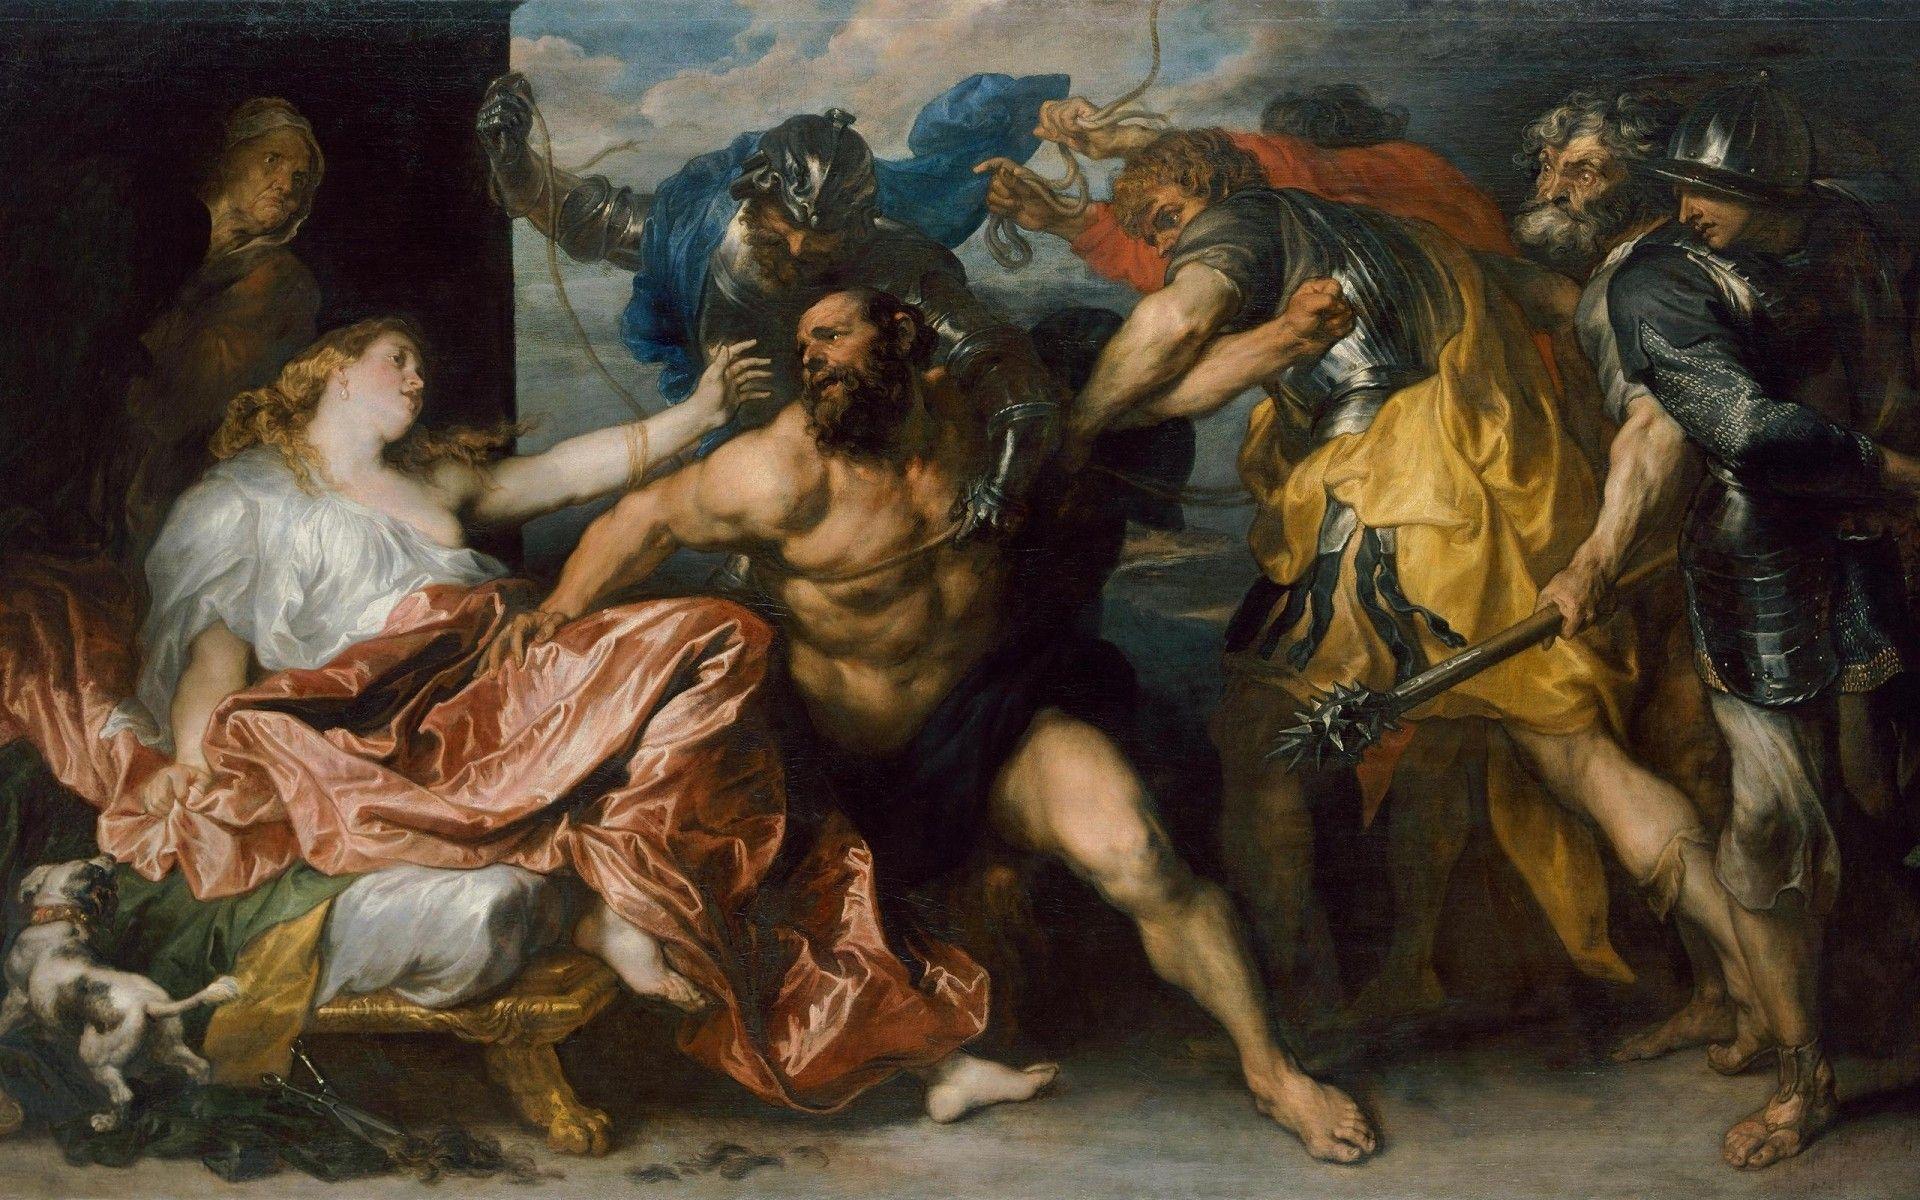 The Taking of Samson Painting. Android wallpaper for free